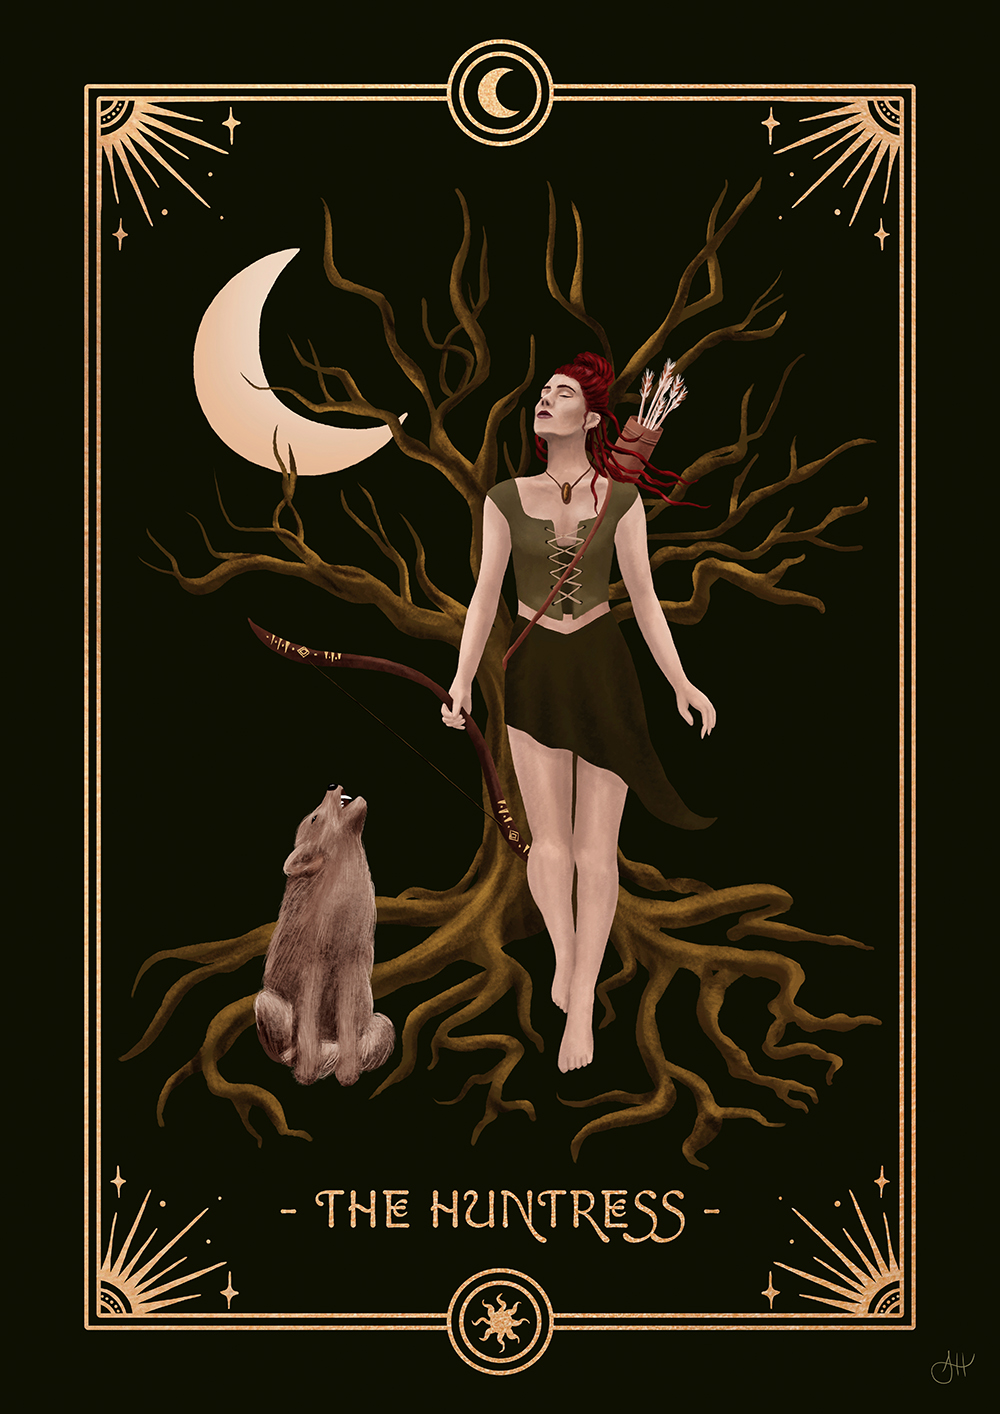 Illustrations of the 7 Feminine Archetypes by Anna Heimkreiter. "The Huntress" shows a warrior woman walking the woods at night, with a wolf by her side.